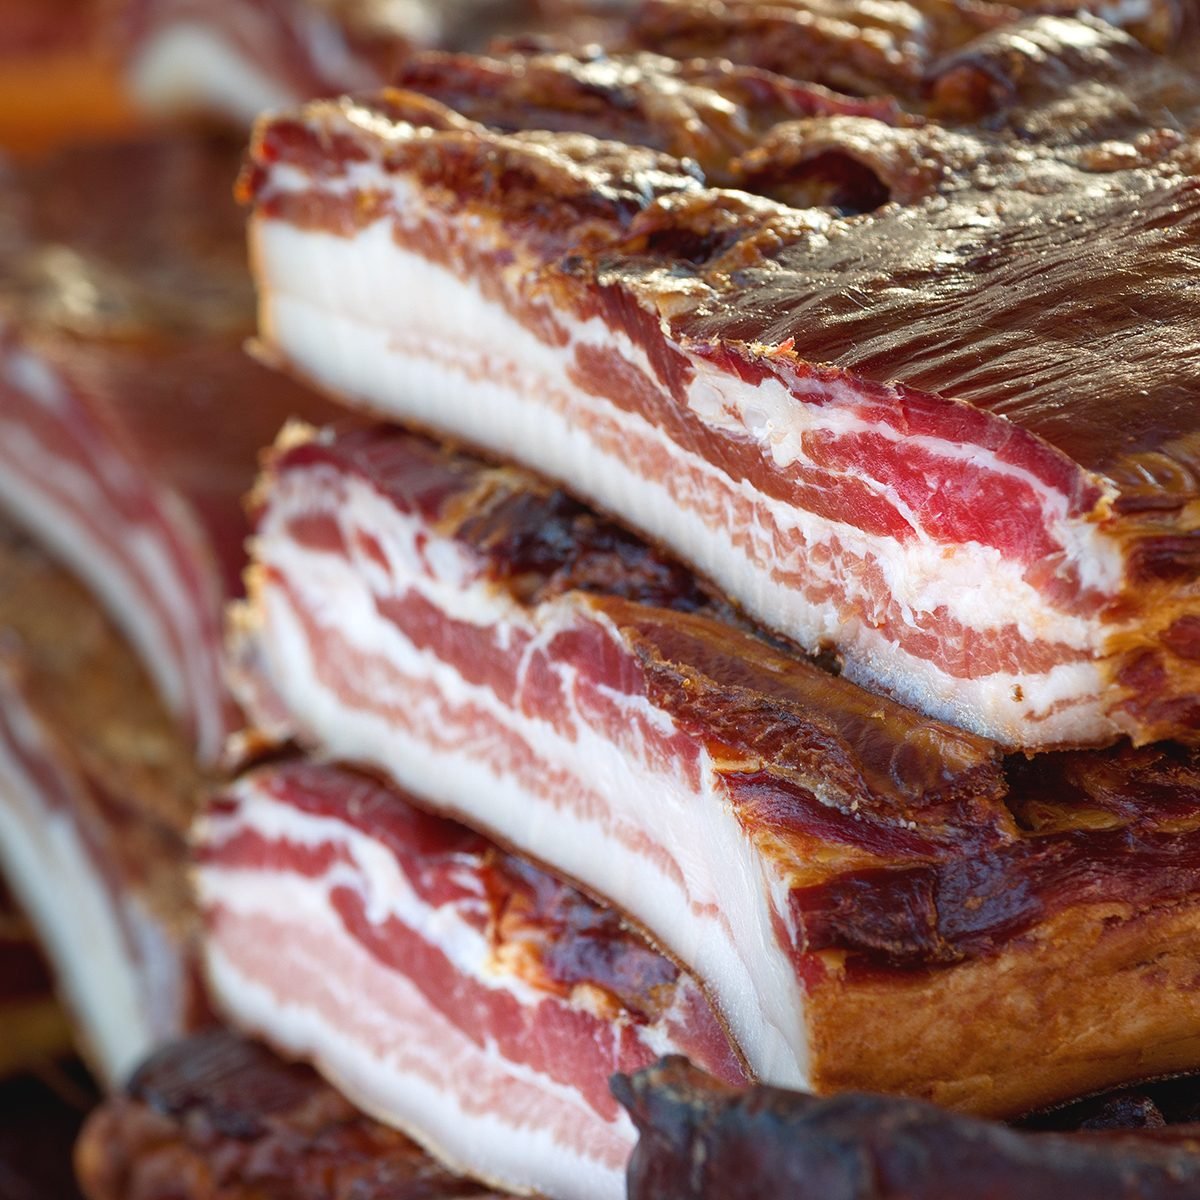 Specialty bacon remain strong